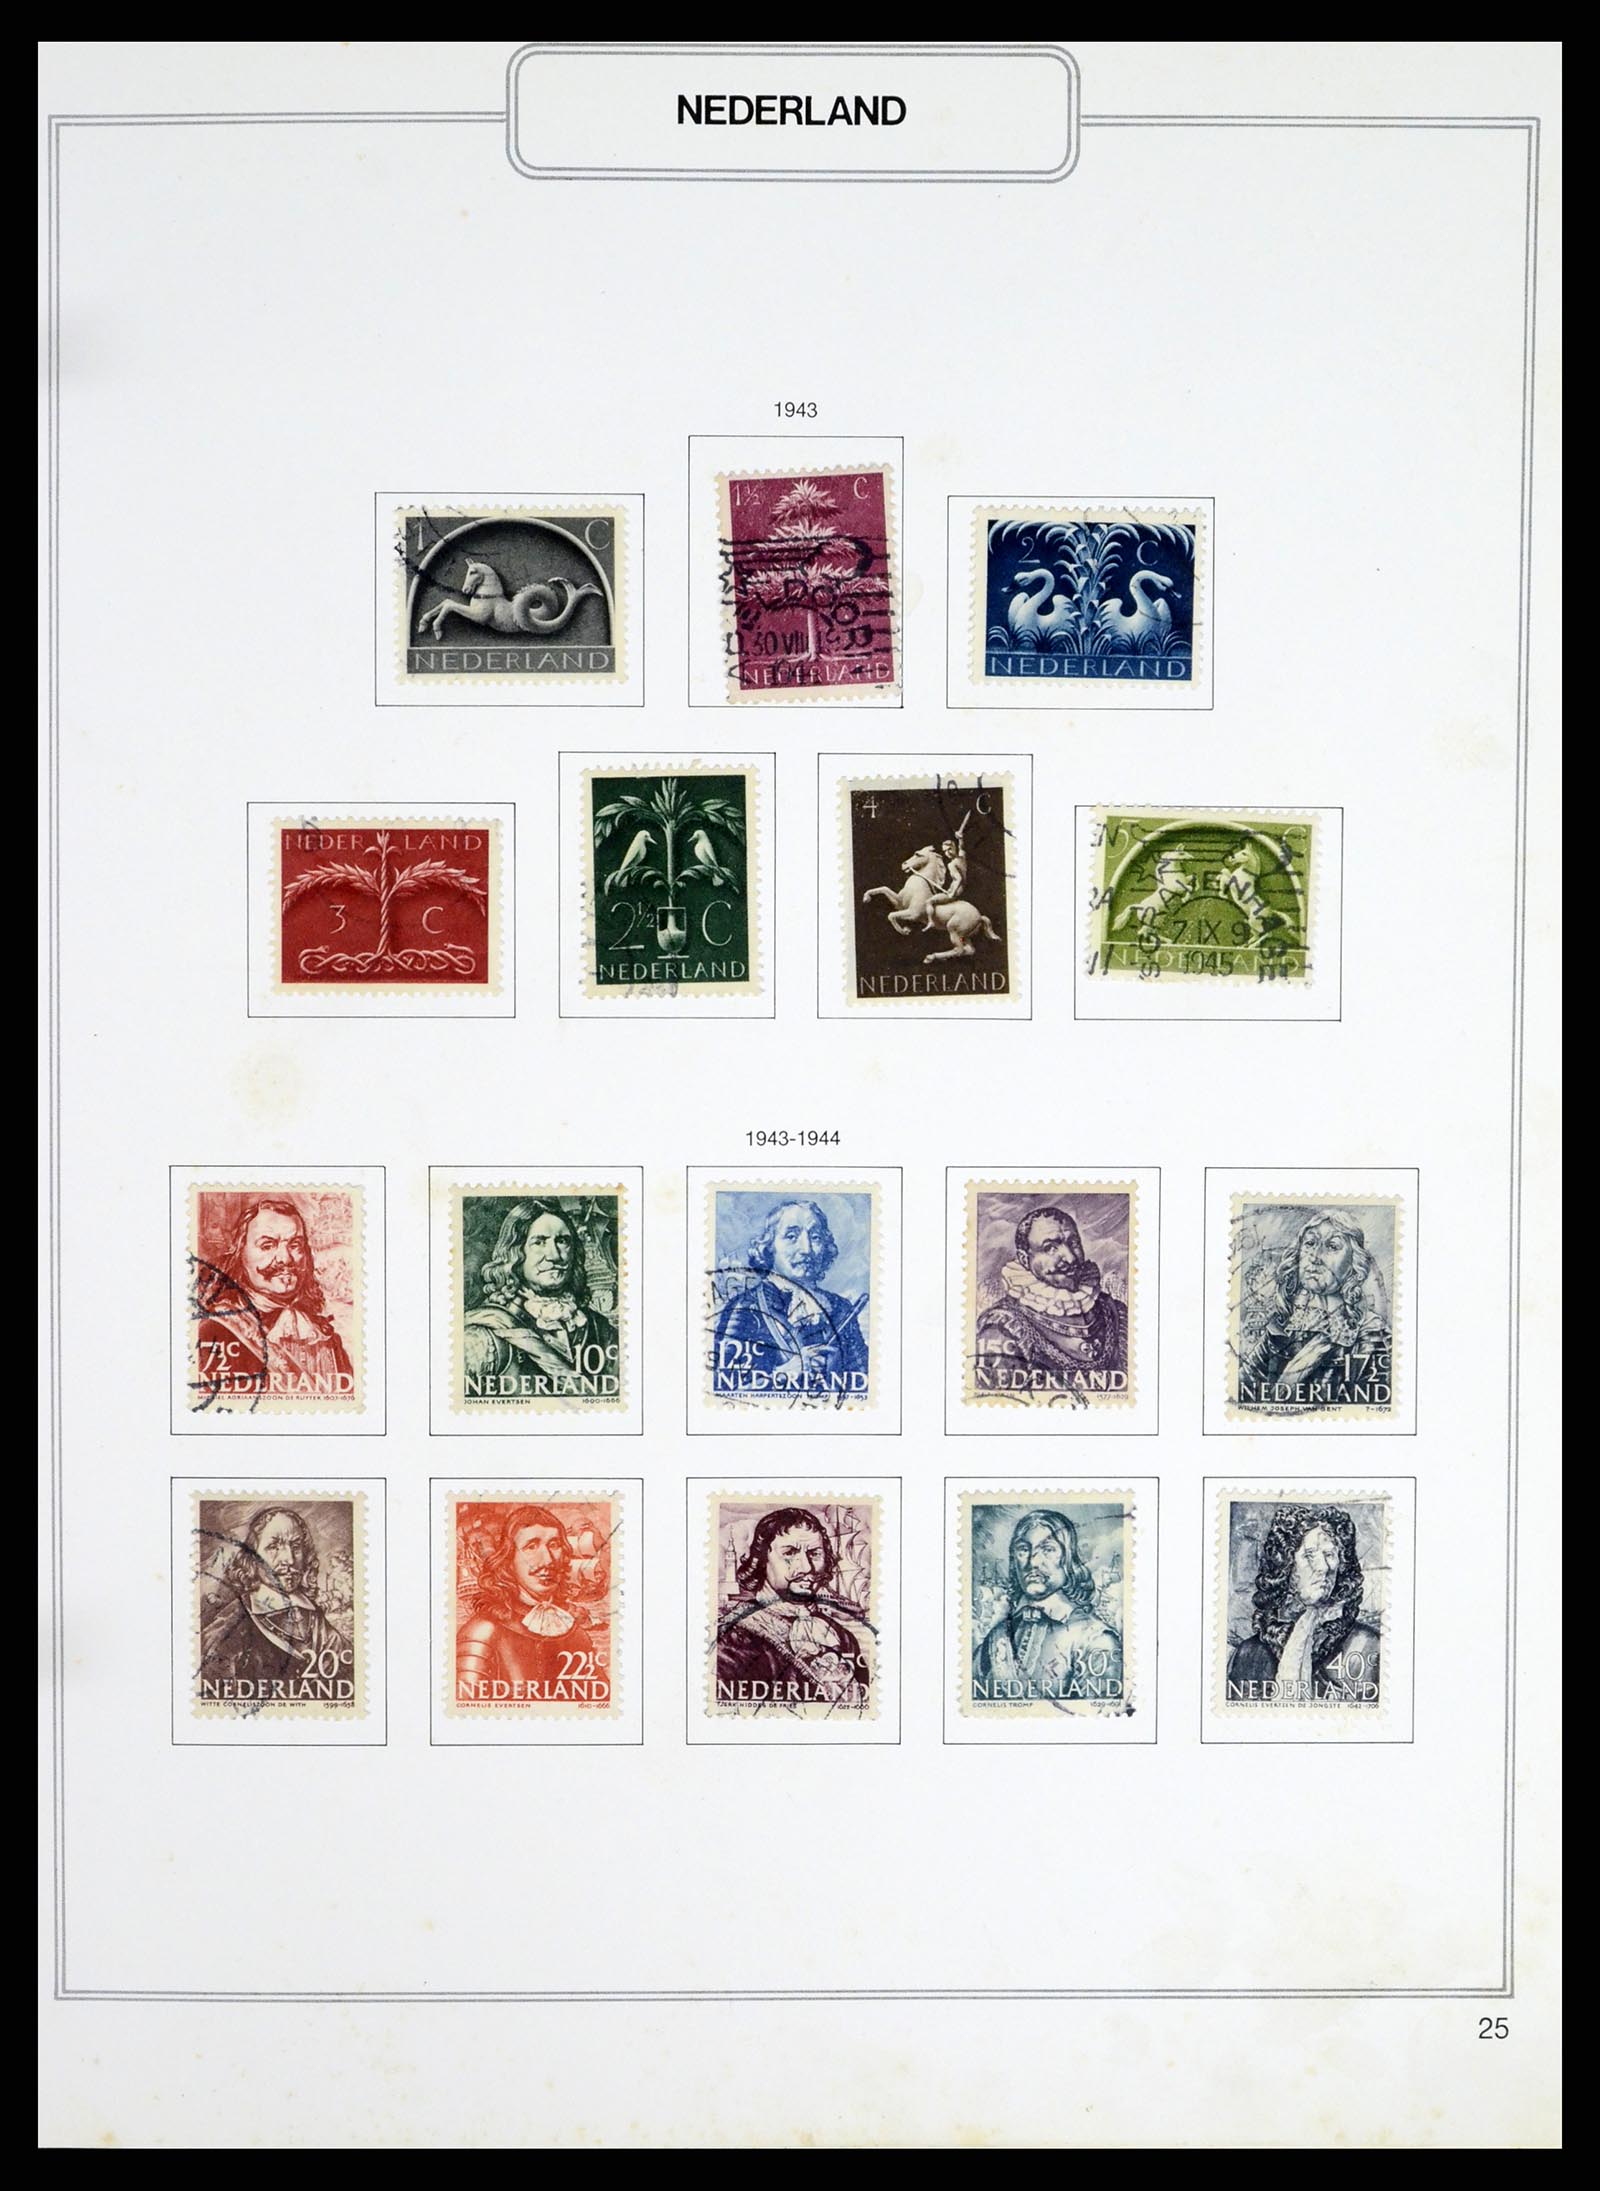 37348 025 - Stamp collection 37348 Netherlands 1852-1995.